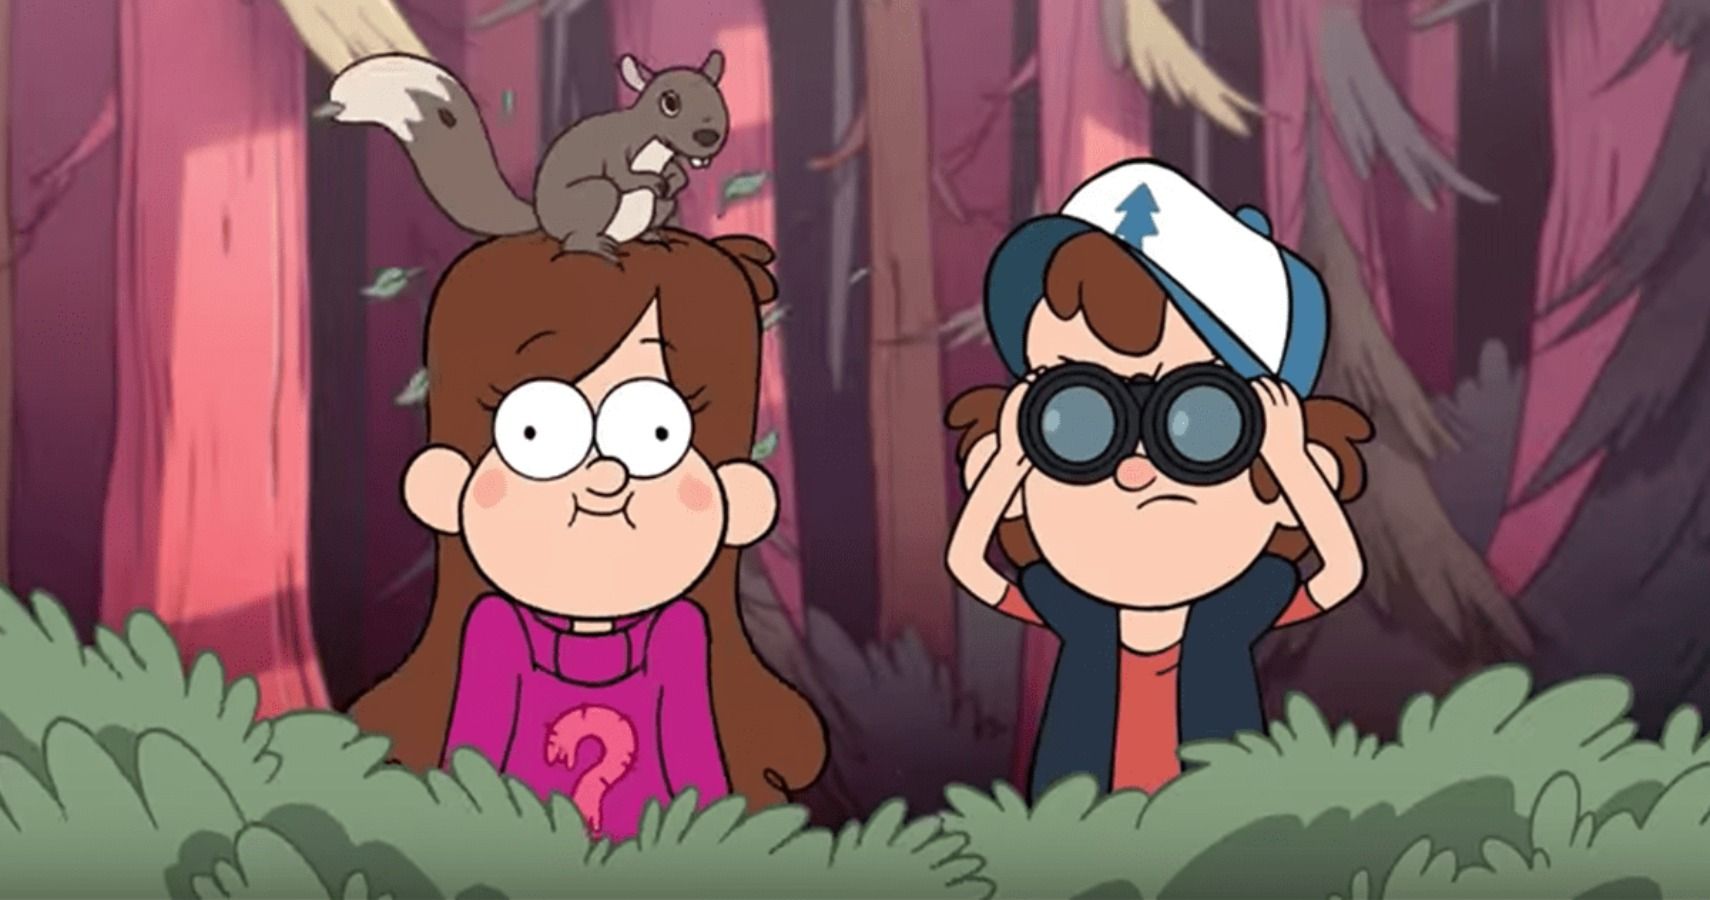 [Image - 530826] | Gravity Falls | Know Your Meme